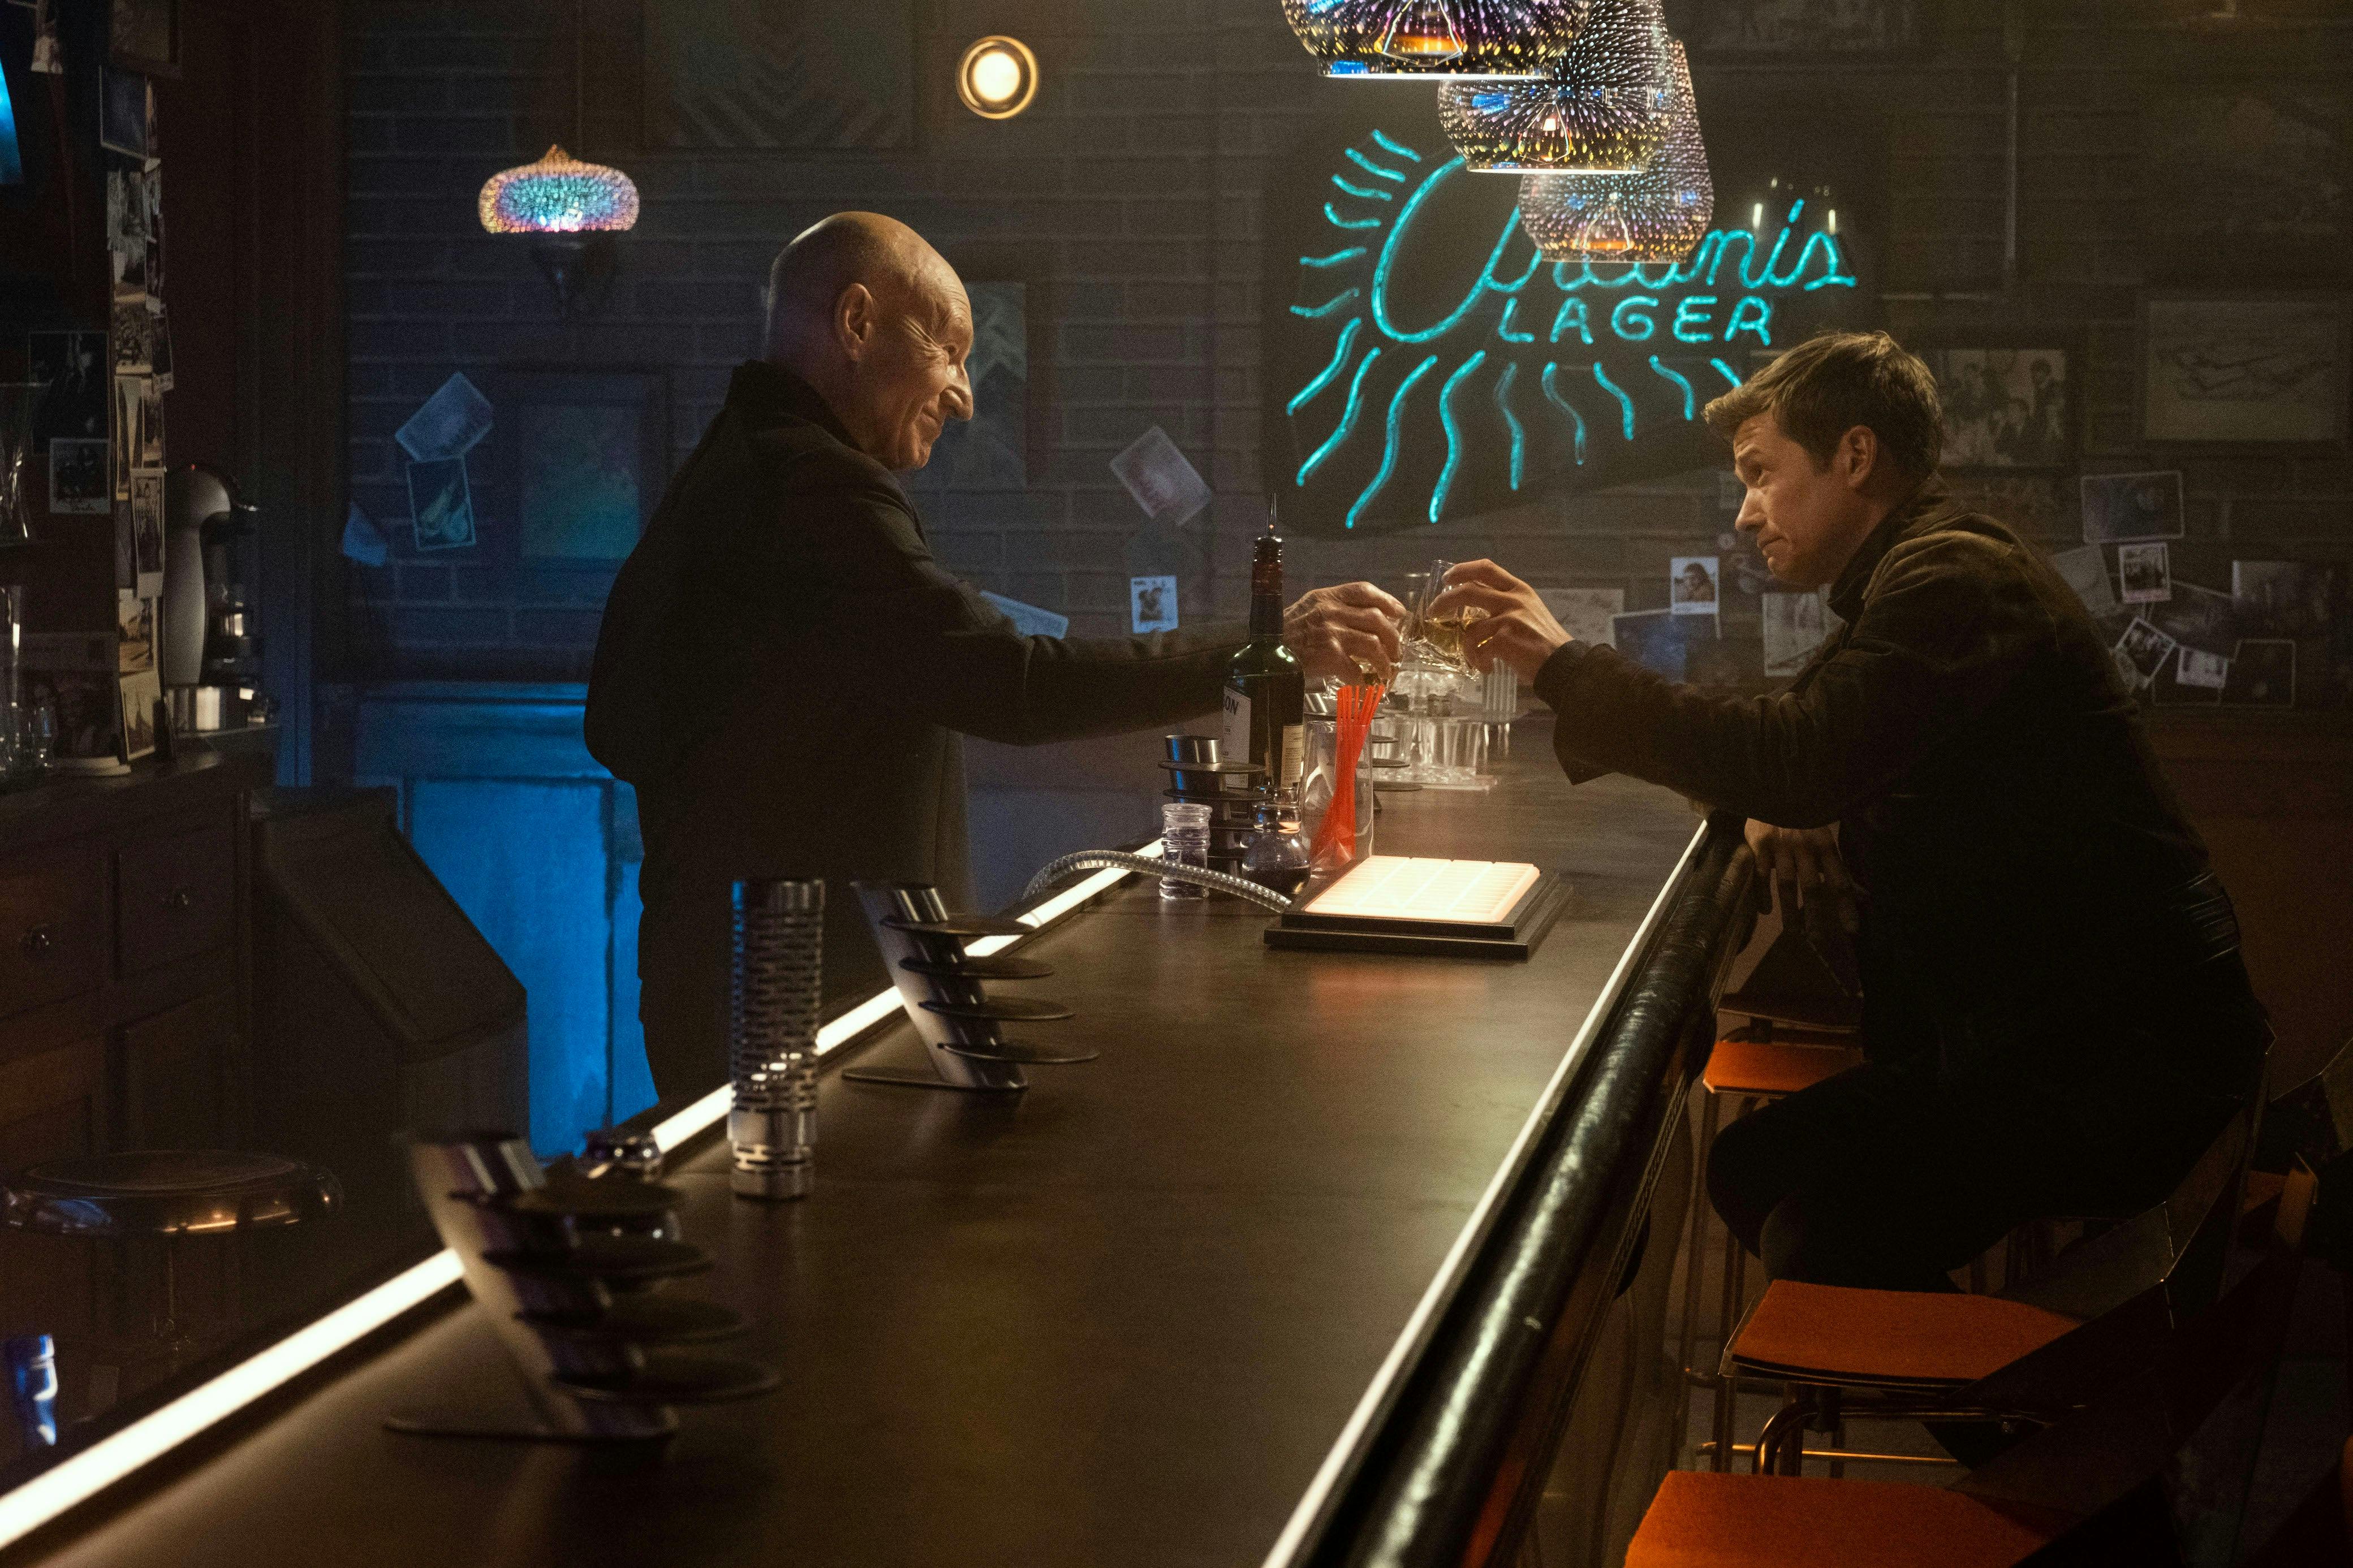 At the 10 Forward holoprogram, Picard pours a drink for himself and Jack Crusher as they raise their glasses together